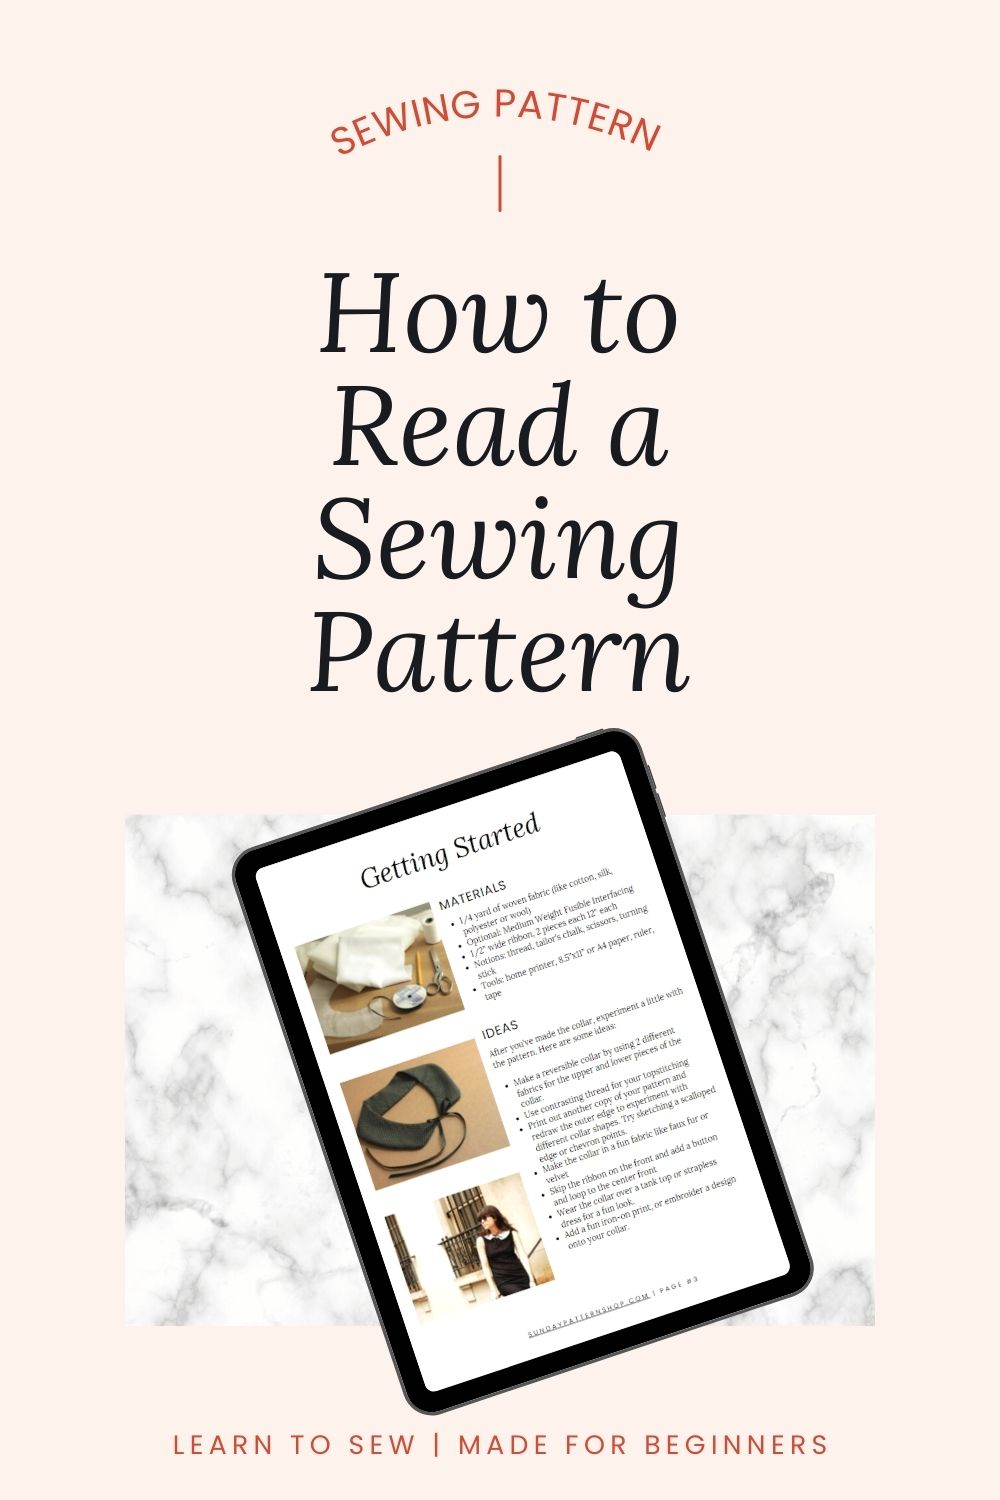 How to read a sewing pattern